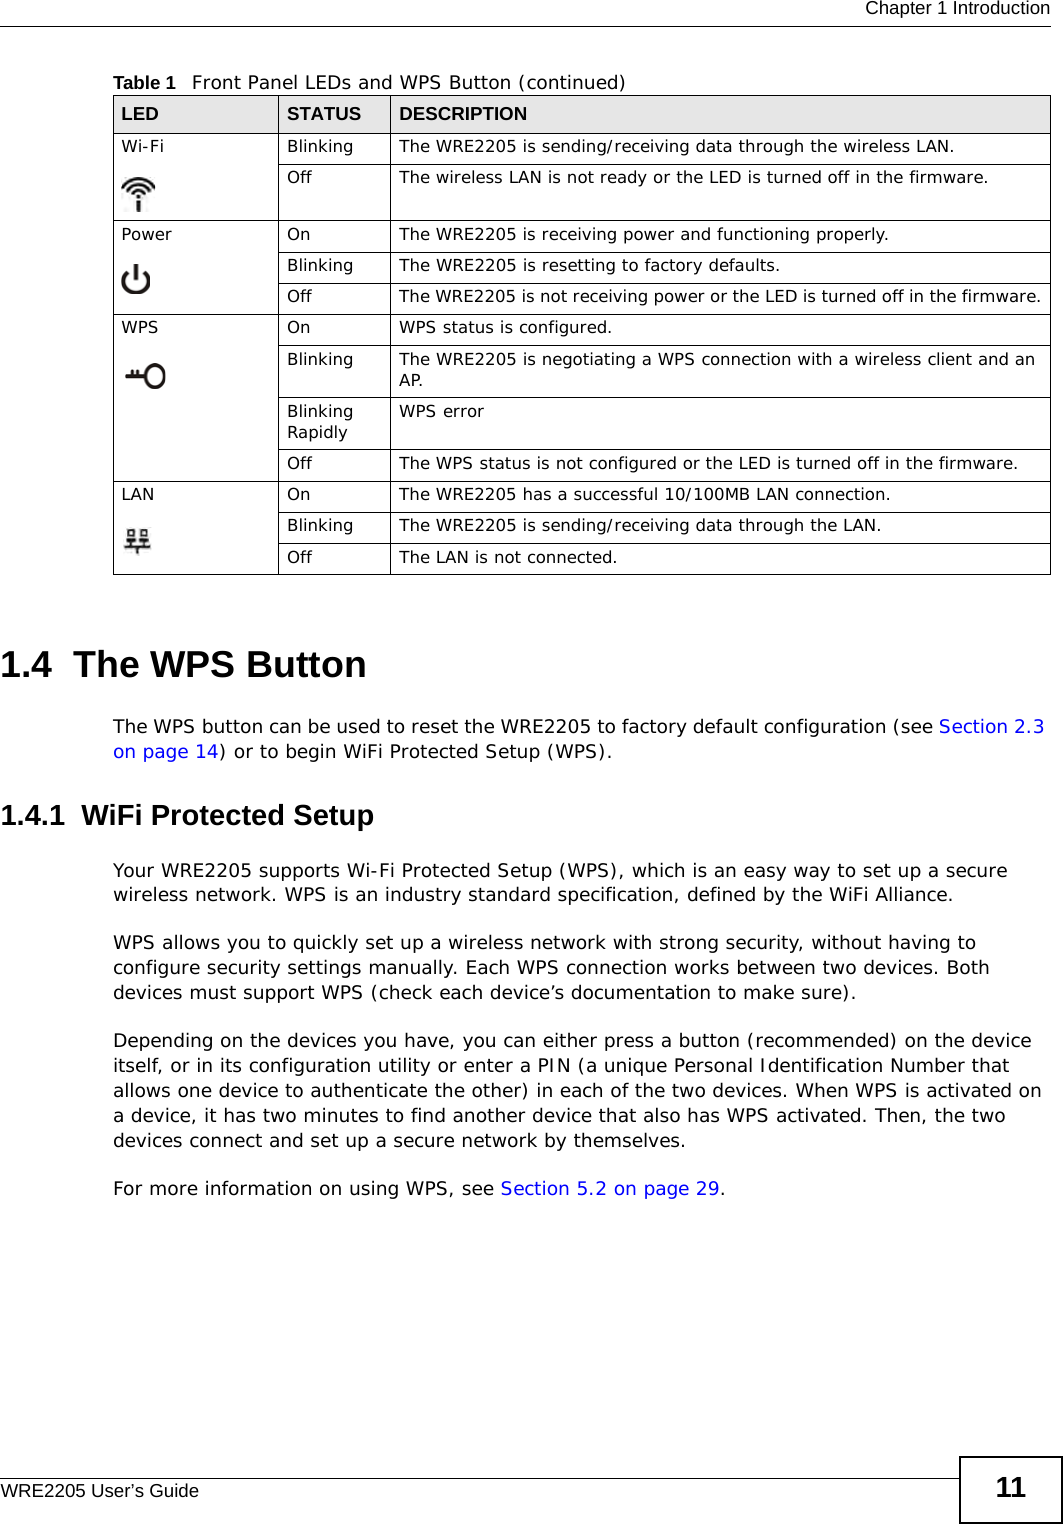  Chapter 1 IntroductionWRE2205 User’s Guide 111.4  The WPS ButtonThe WPS button can be used to reset the WRE2205 to factory default configuration (see Section 2.3 on page 14) or to begin WiFi Protected Setup (WPS).1.4.1  WiFi Protected SetupYour WRE2205 supports Wi-Fi Protected Setup (WPS), which is an easy way to set up a secure wireless network. WPS is an industry standard specification, defined by the WiFi Alliance.WPS allows you to quickly set up a wireless network with strong security, without having to configure security settings manually. Each WPS connection works between two devices. Both devices must support WPS (check each device’s documentation to make sure). Depending on the devices you have, you can either press a button (recommended) on the device itself, or in its configuration utility or enter a PIN (a unique Personal Identification Number that allows one device to authenticate the other) in each of the two devices. When WPS is activated on a device, it has two minutes to find another device that also has WPS activated. Then, the two devices connect and set up a secure network by themselves.For more information on using WPS, see Section 5.2 on page 29.Wi-Fi  Blinking The WRE2205 is sending/receiving data through the wireless LAN.Off The wireless LAN is not ready or the LED is turned off in the firmware.Power On The WRE2205 is receiving power and functioning properly. Blinking The WRE2205 is resetting to factory defaults.Off The WRE2205 is not receiving power or the LED is turned off in the firmware.WPS On WPS status is configured. Blinking The WRE2205 is negotiating a WPS connection with a wireless client and an AP.Blinking Rapidly WPS errorOff The WPS status is not configured or the LED is turned off in the firmware.LAN On The WRE2205 has a successful 10/100MB LAN connection. Blinking The WRE2205 is sending/receiving data through the LAN.Off The LAN is not connected.Table 1   Front Panel LEDs and WPS Button (continued)LED STATUS DESCRIPTION